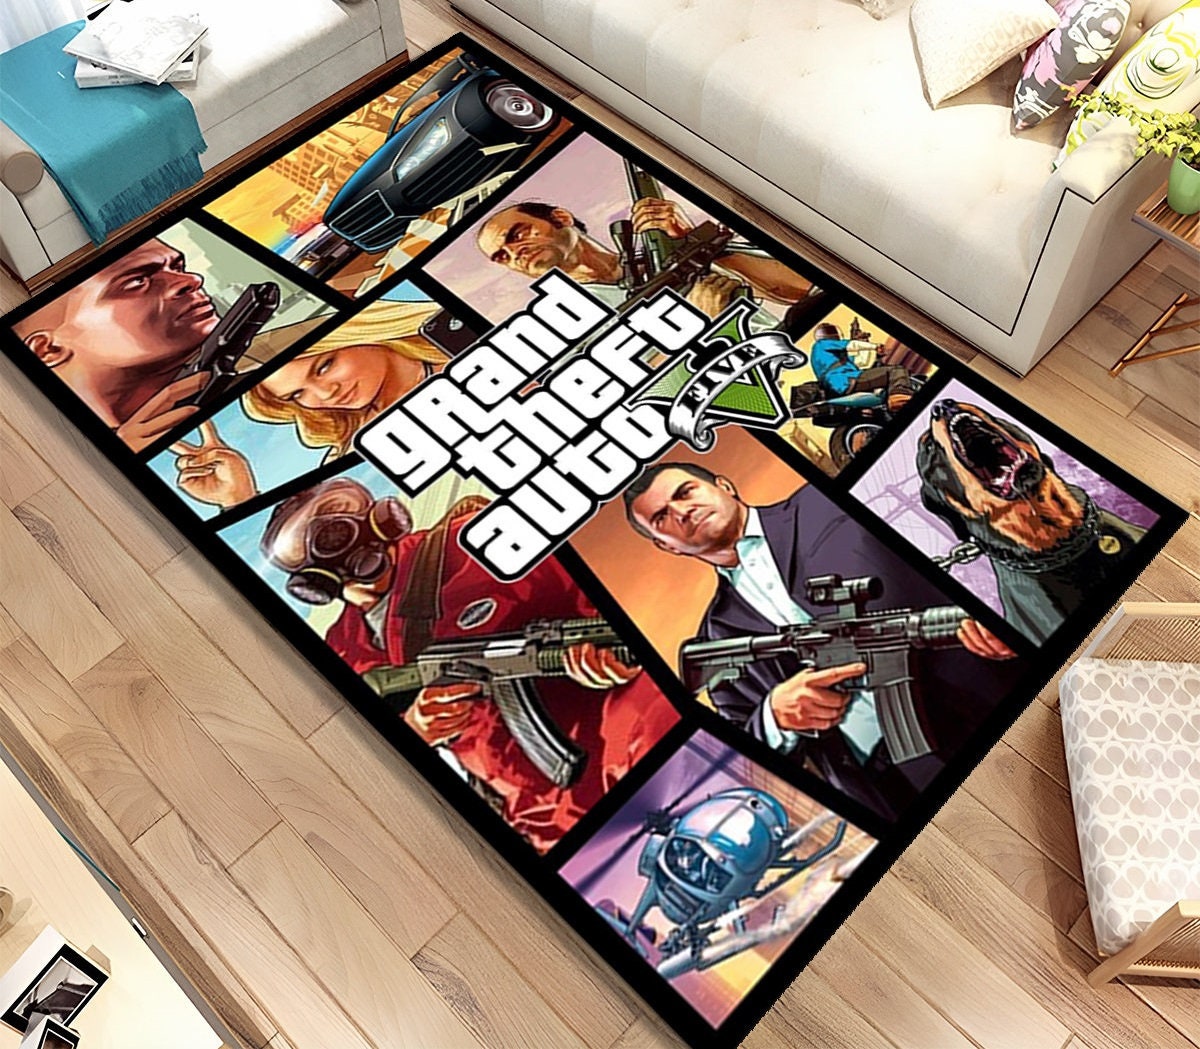 Grand Theft Auto Liberty City Stories and Vice City Stories Disc Round Rug  Carpet